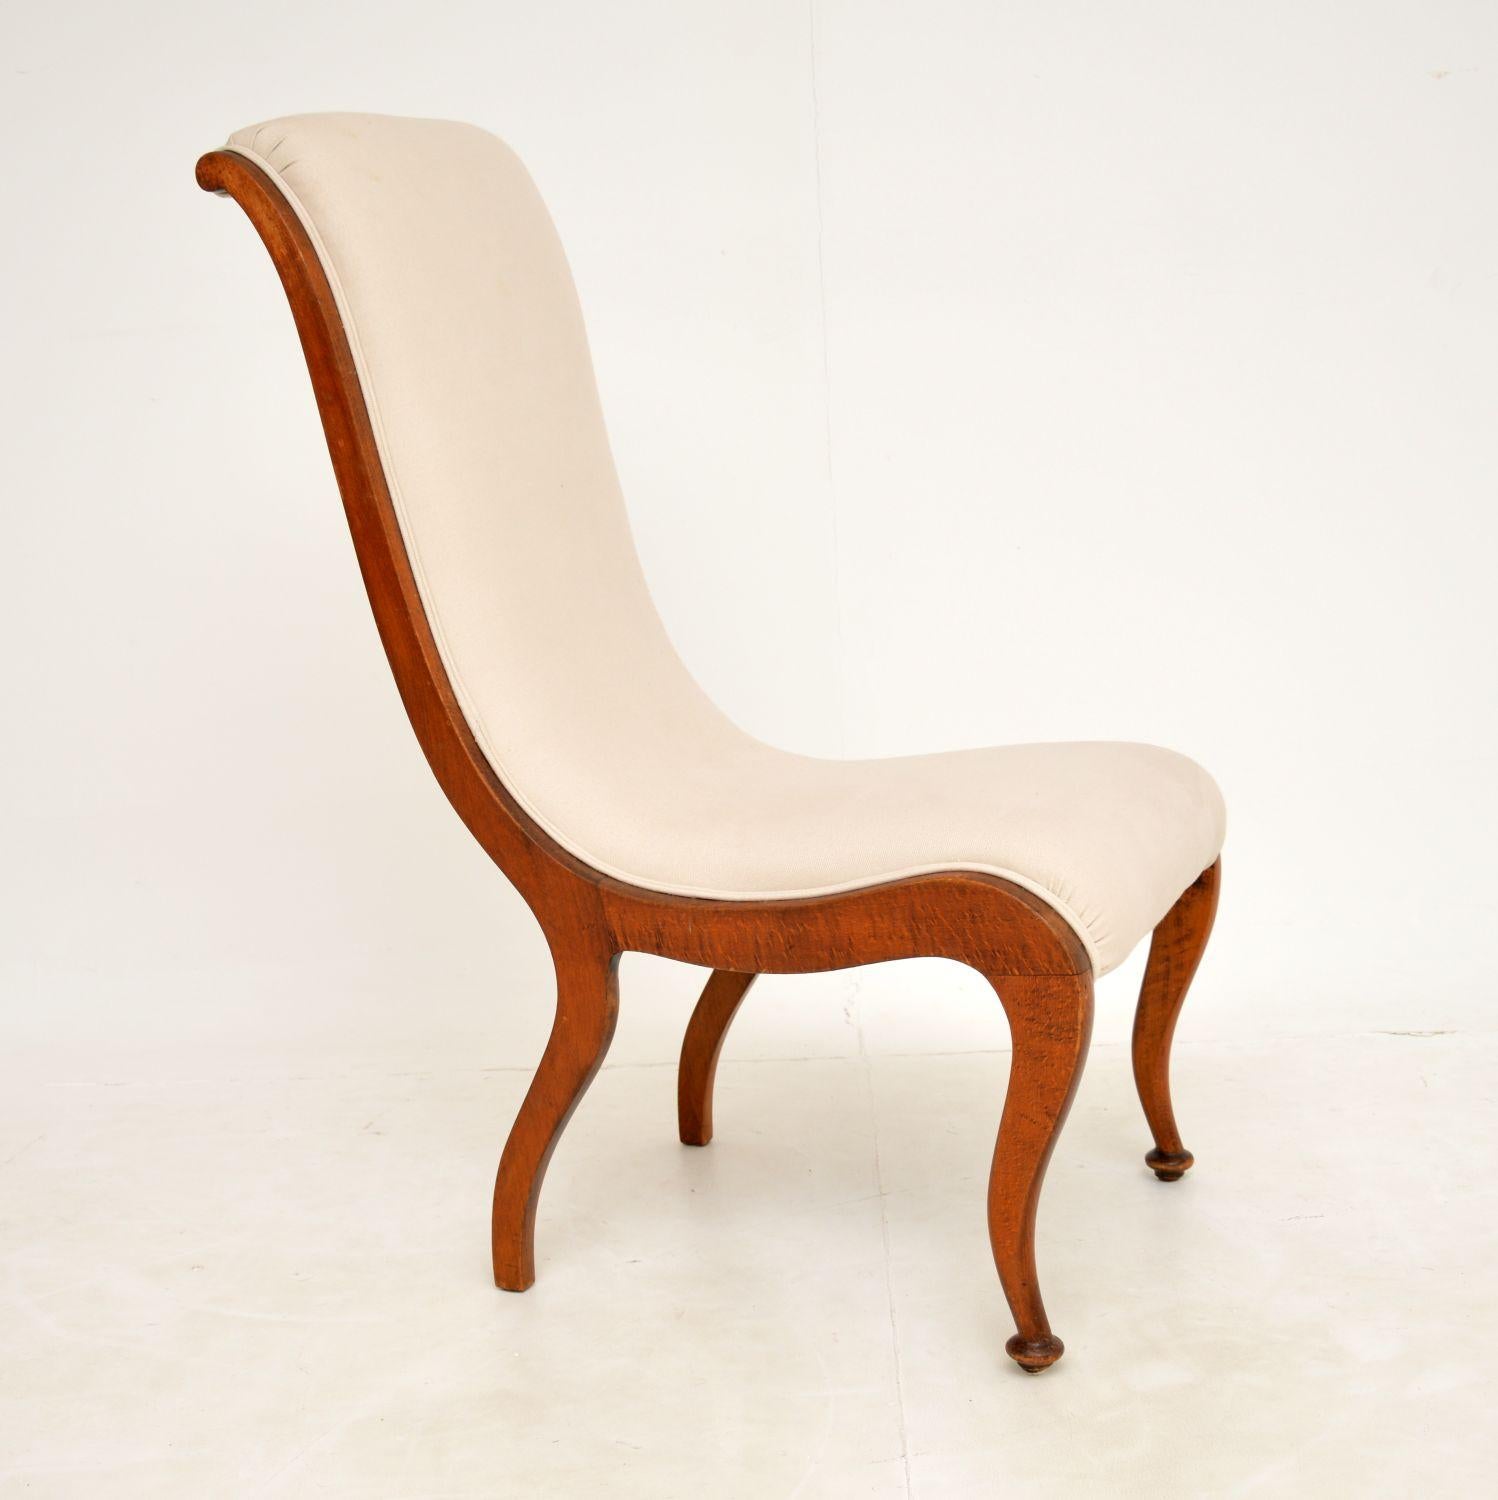 A beautiful and elegant Regency period easy chair in solid beech or walnut. This was made in England, it dates from around the 1820-1830 period.

This has a gorgeous shapely design, and is quite small yet very comfortable. The whole frame is